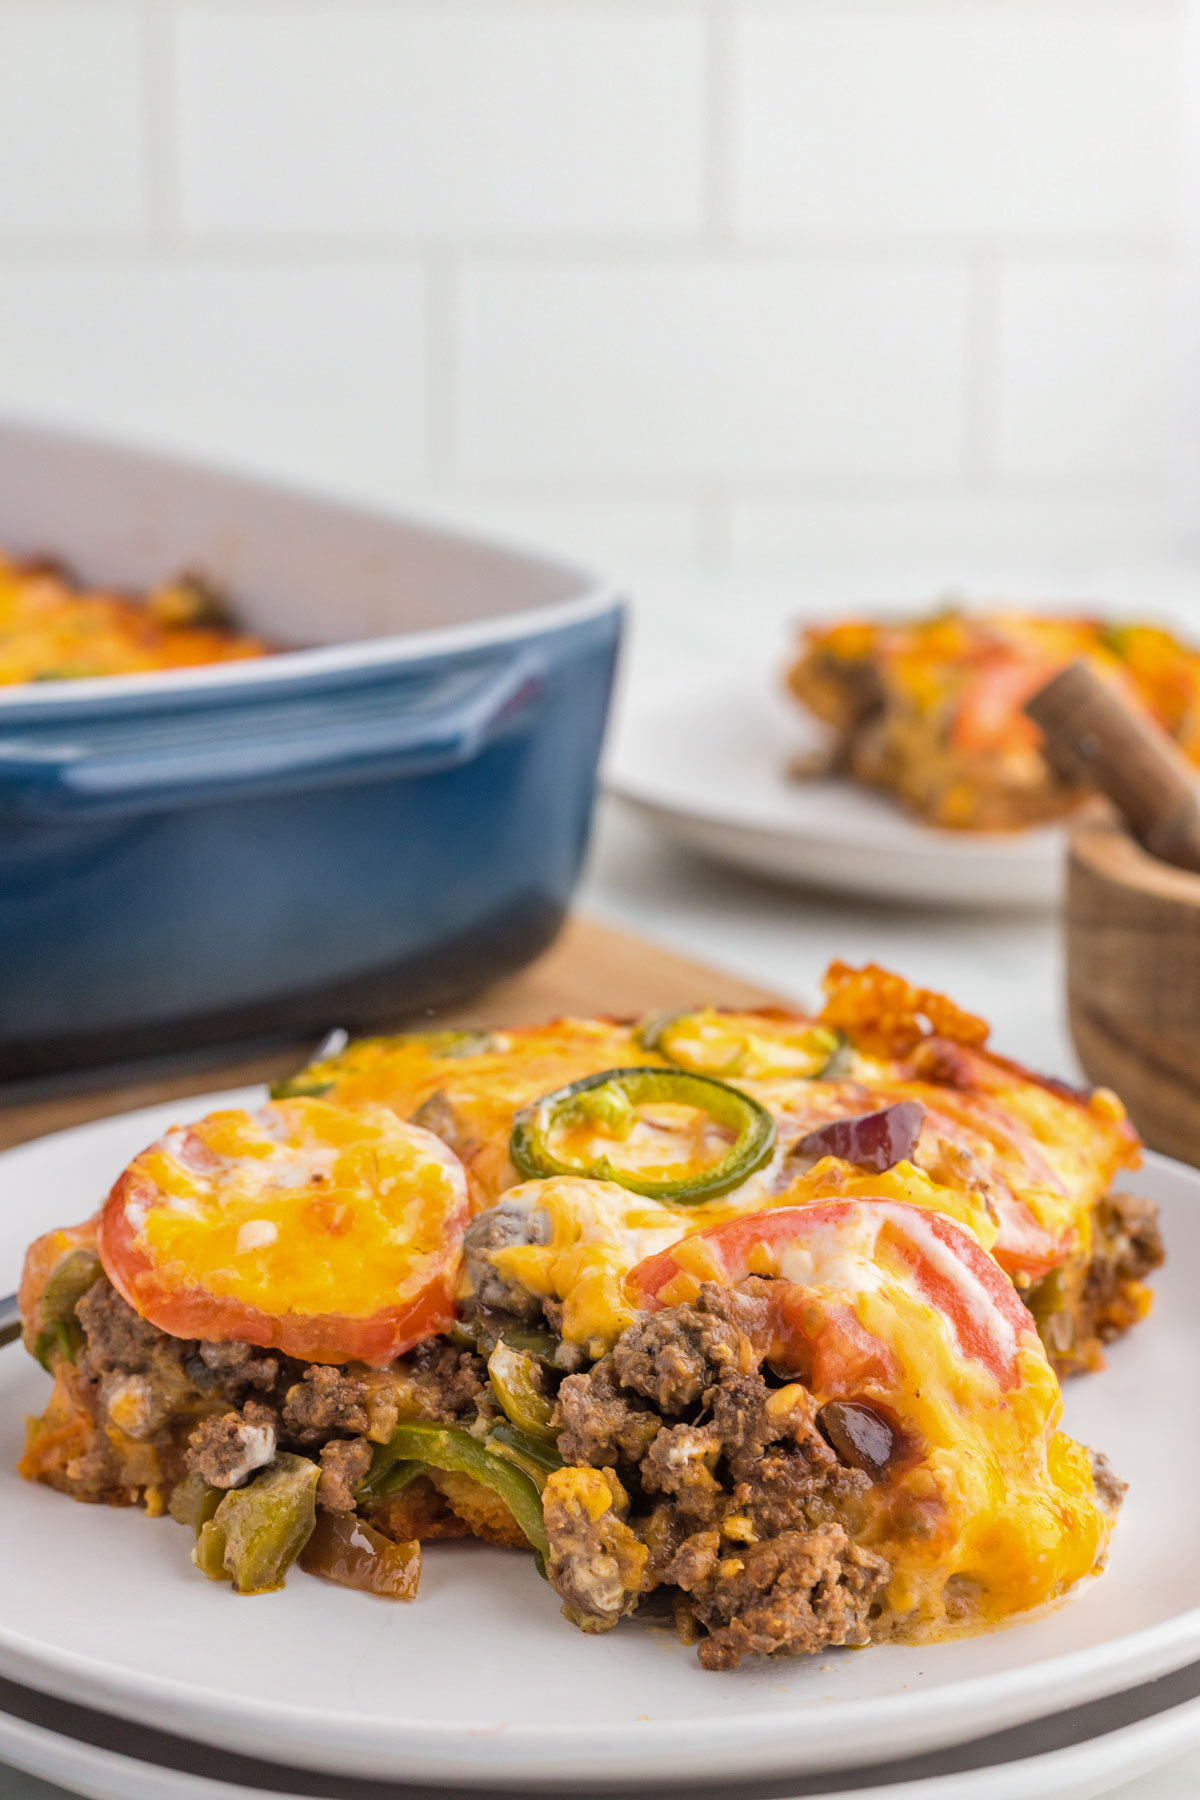 Slice of John Wayne Casserole with tomatoes and jalapeno on a plate.